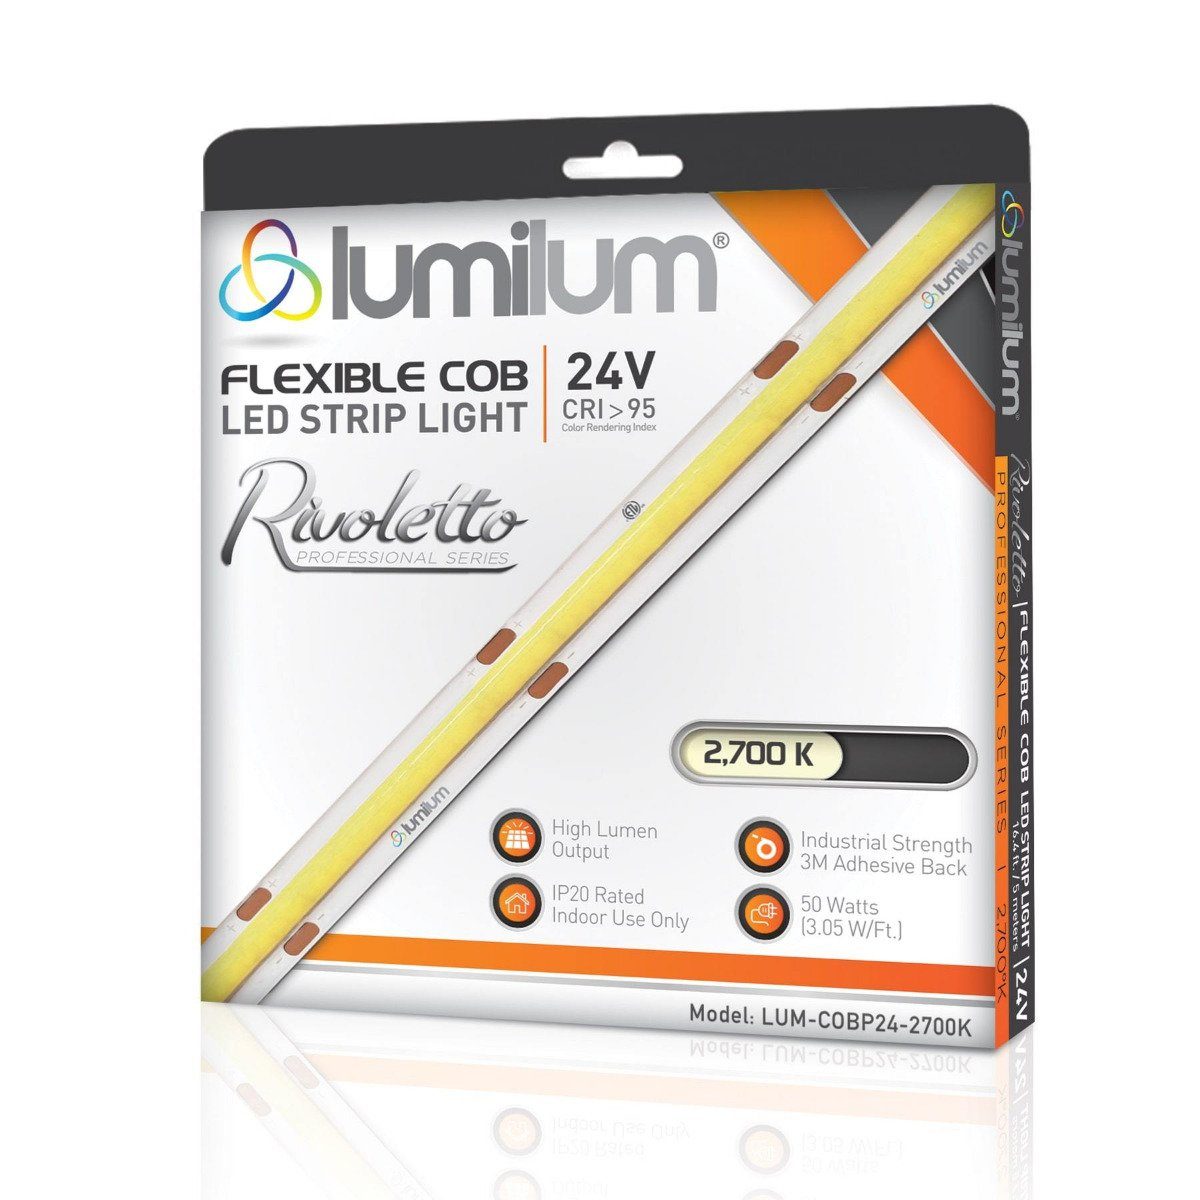 Lumilum 2700k led strip light packaging with orange and white accents showing led strip with yellow line